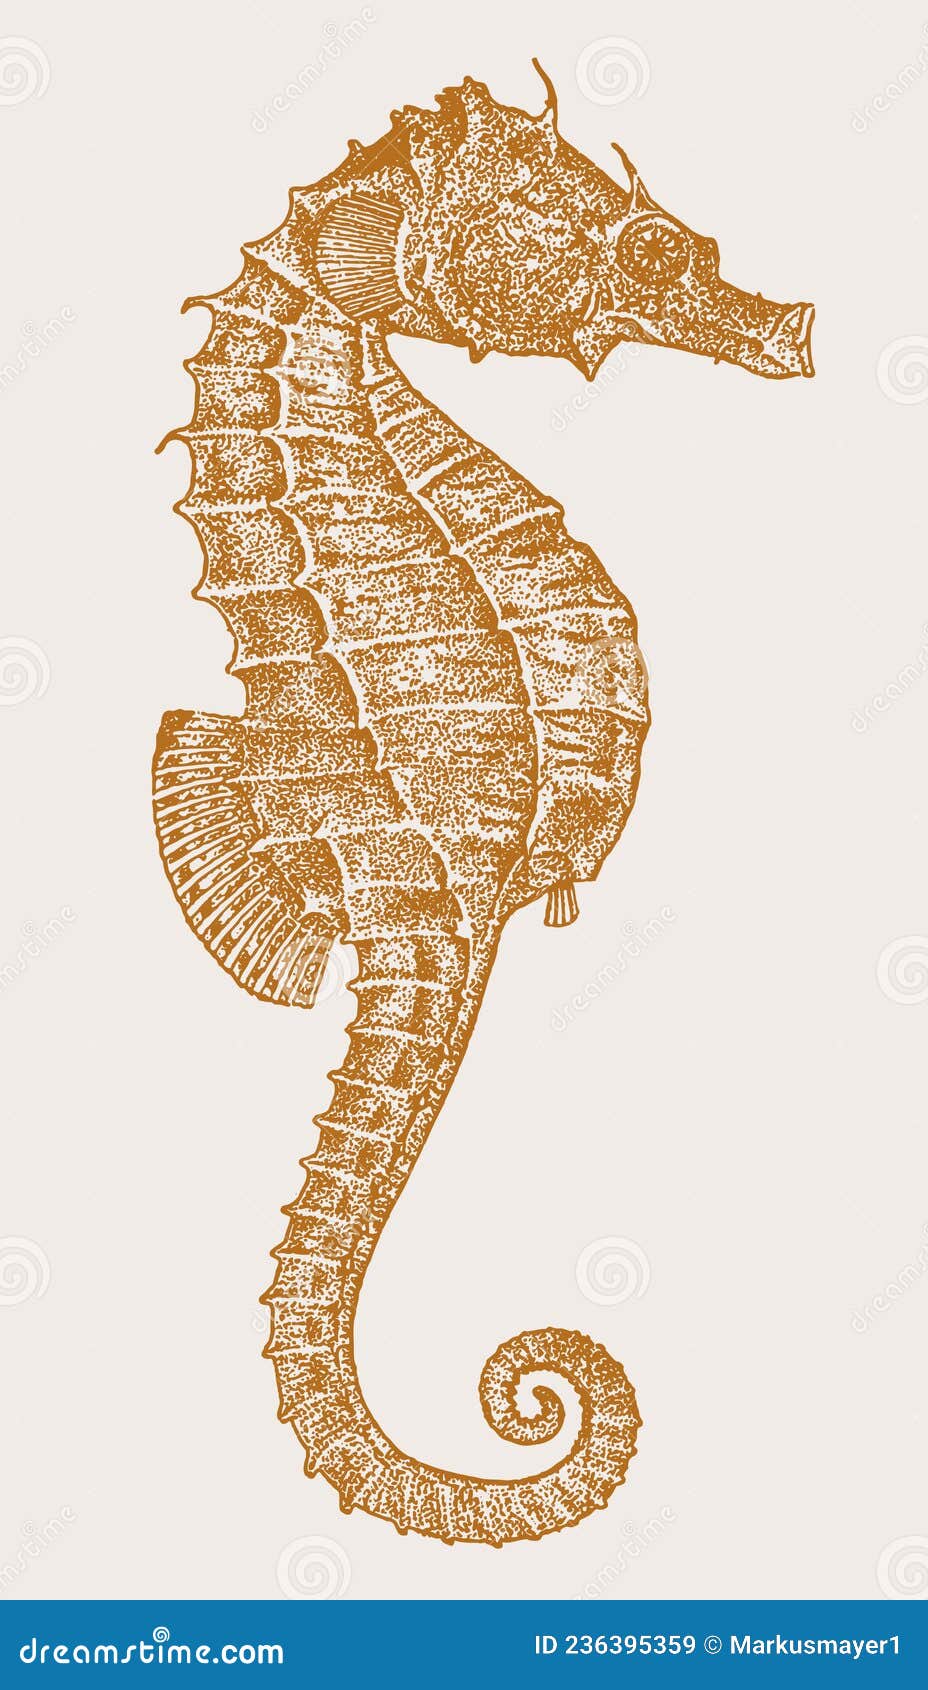 threatened female lined seahorse hippocampus erectus in profile view